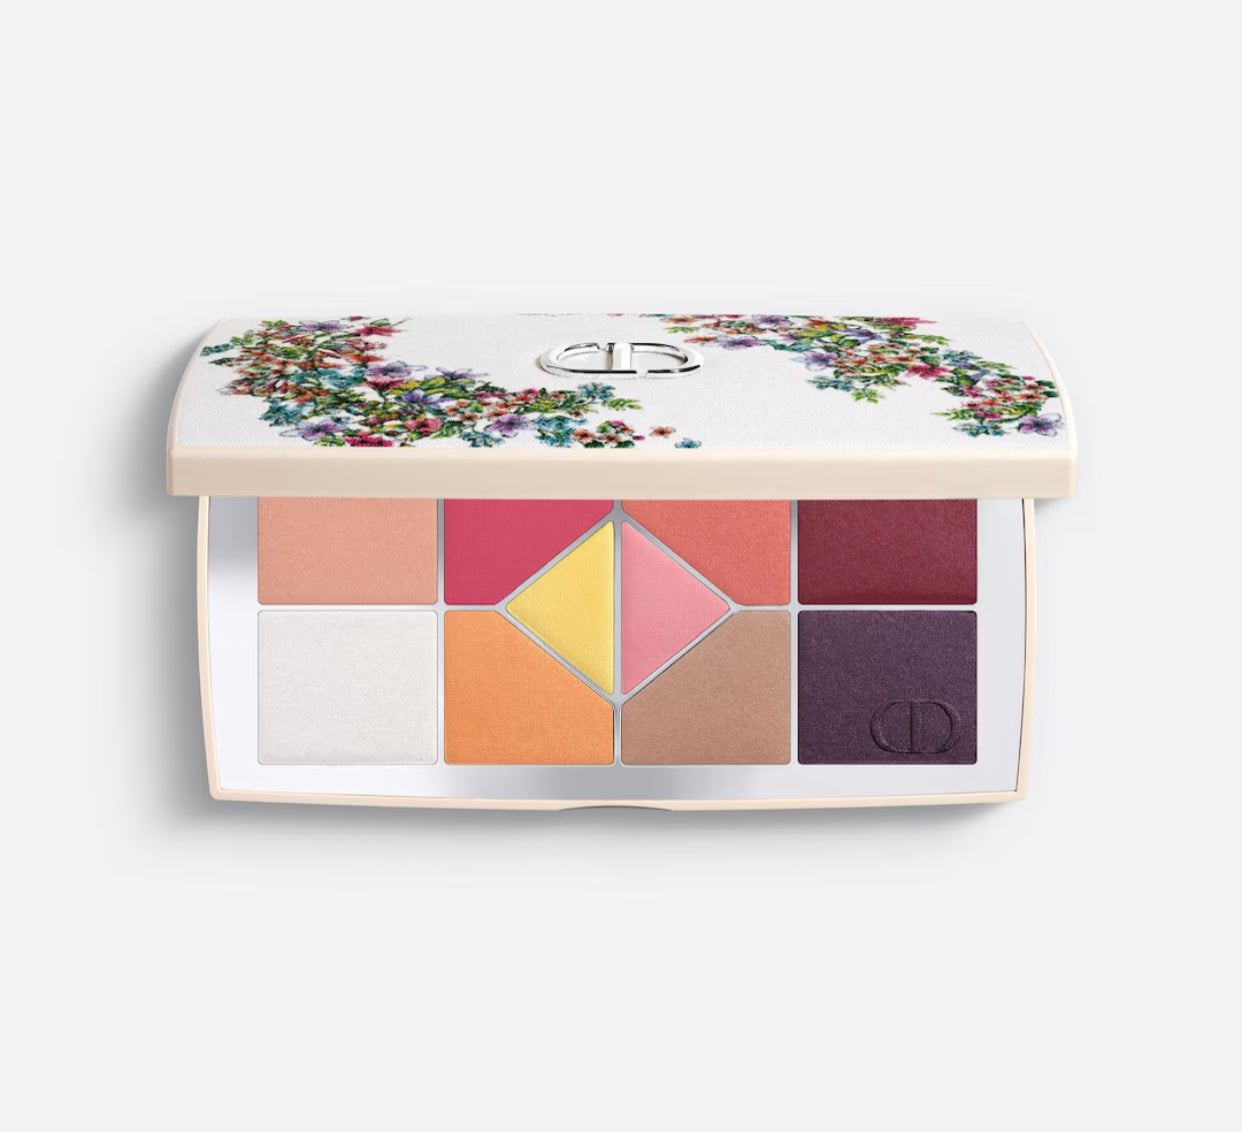 DIOR, DIORSHOW 10 COULEURS - BLOOMING BOUDOIR EYESHADOW PALETTE LIMITED EDITION